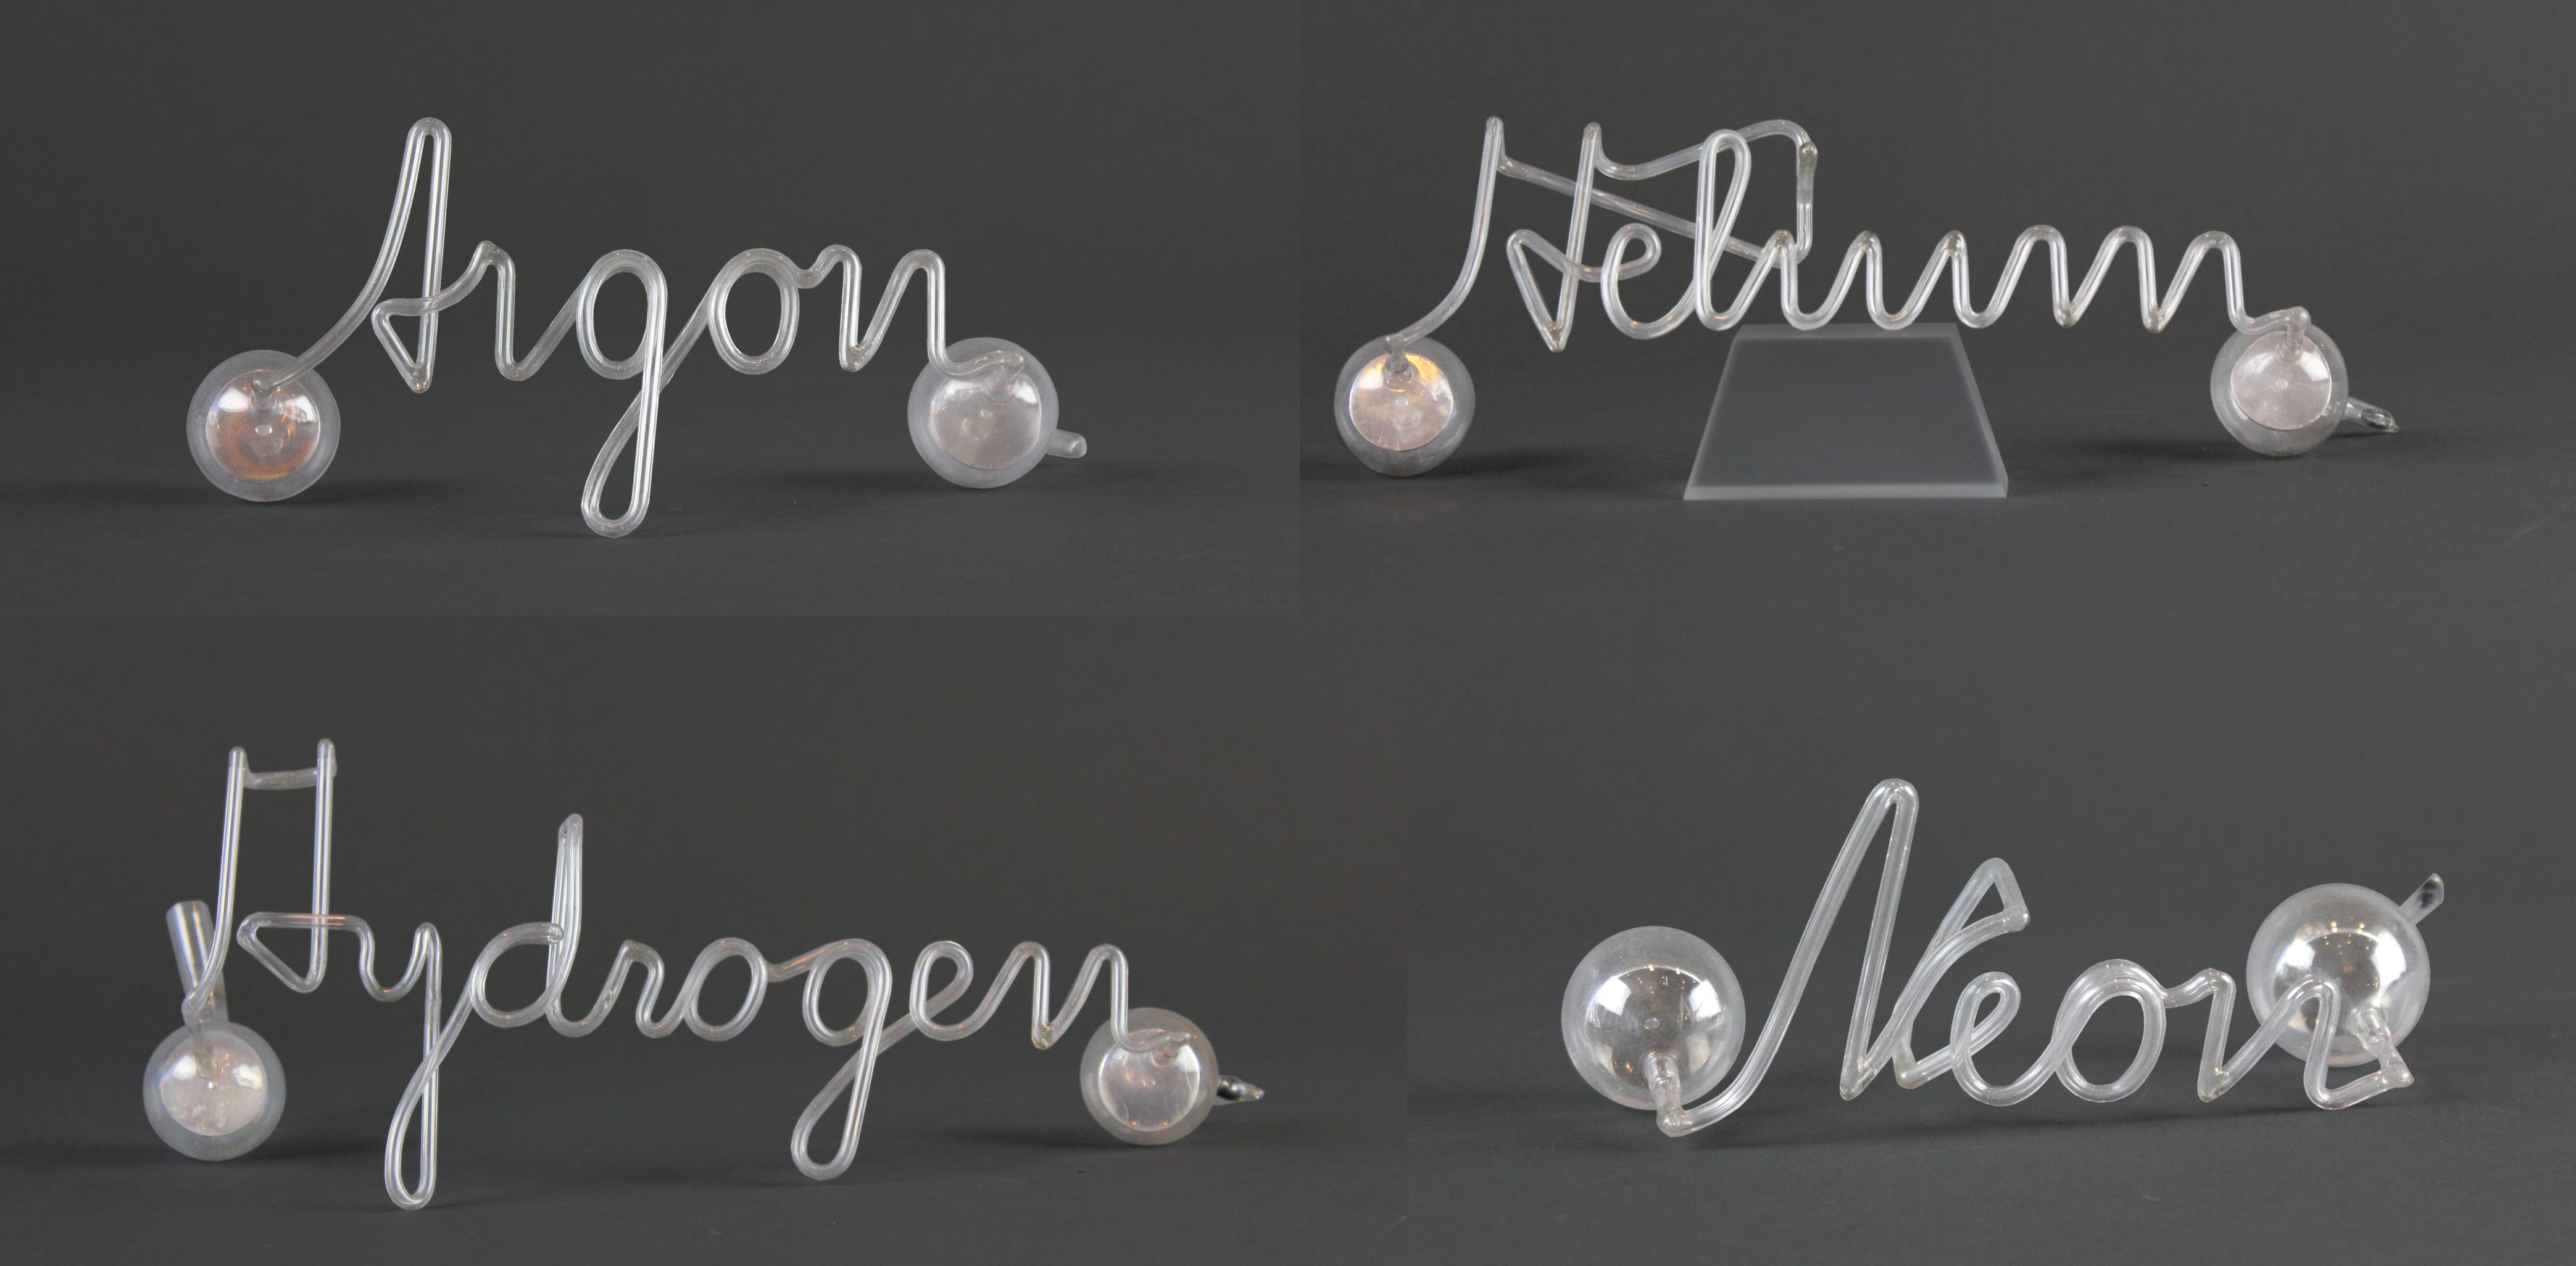 Photographs of Argon, Helium, Hydrogen, and Neon luminous script signs designed by Perley G. Nutting and fabricated by Edward O. Sperling of NBS in 1904.